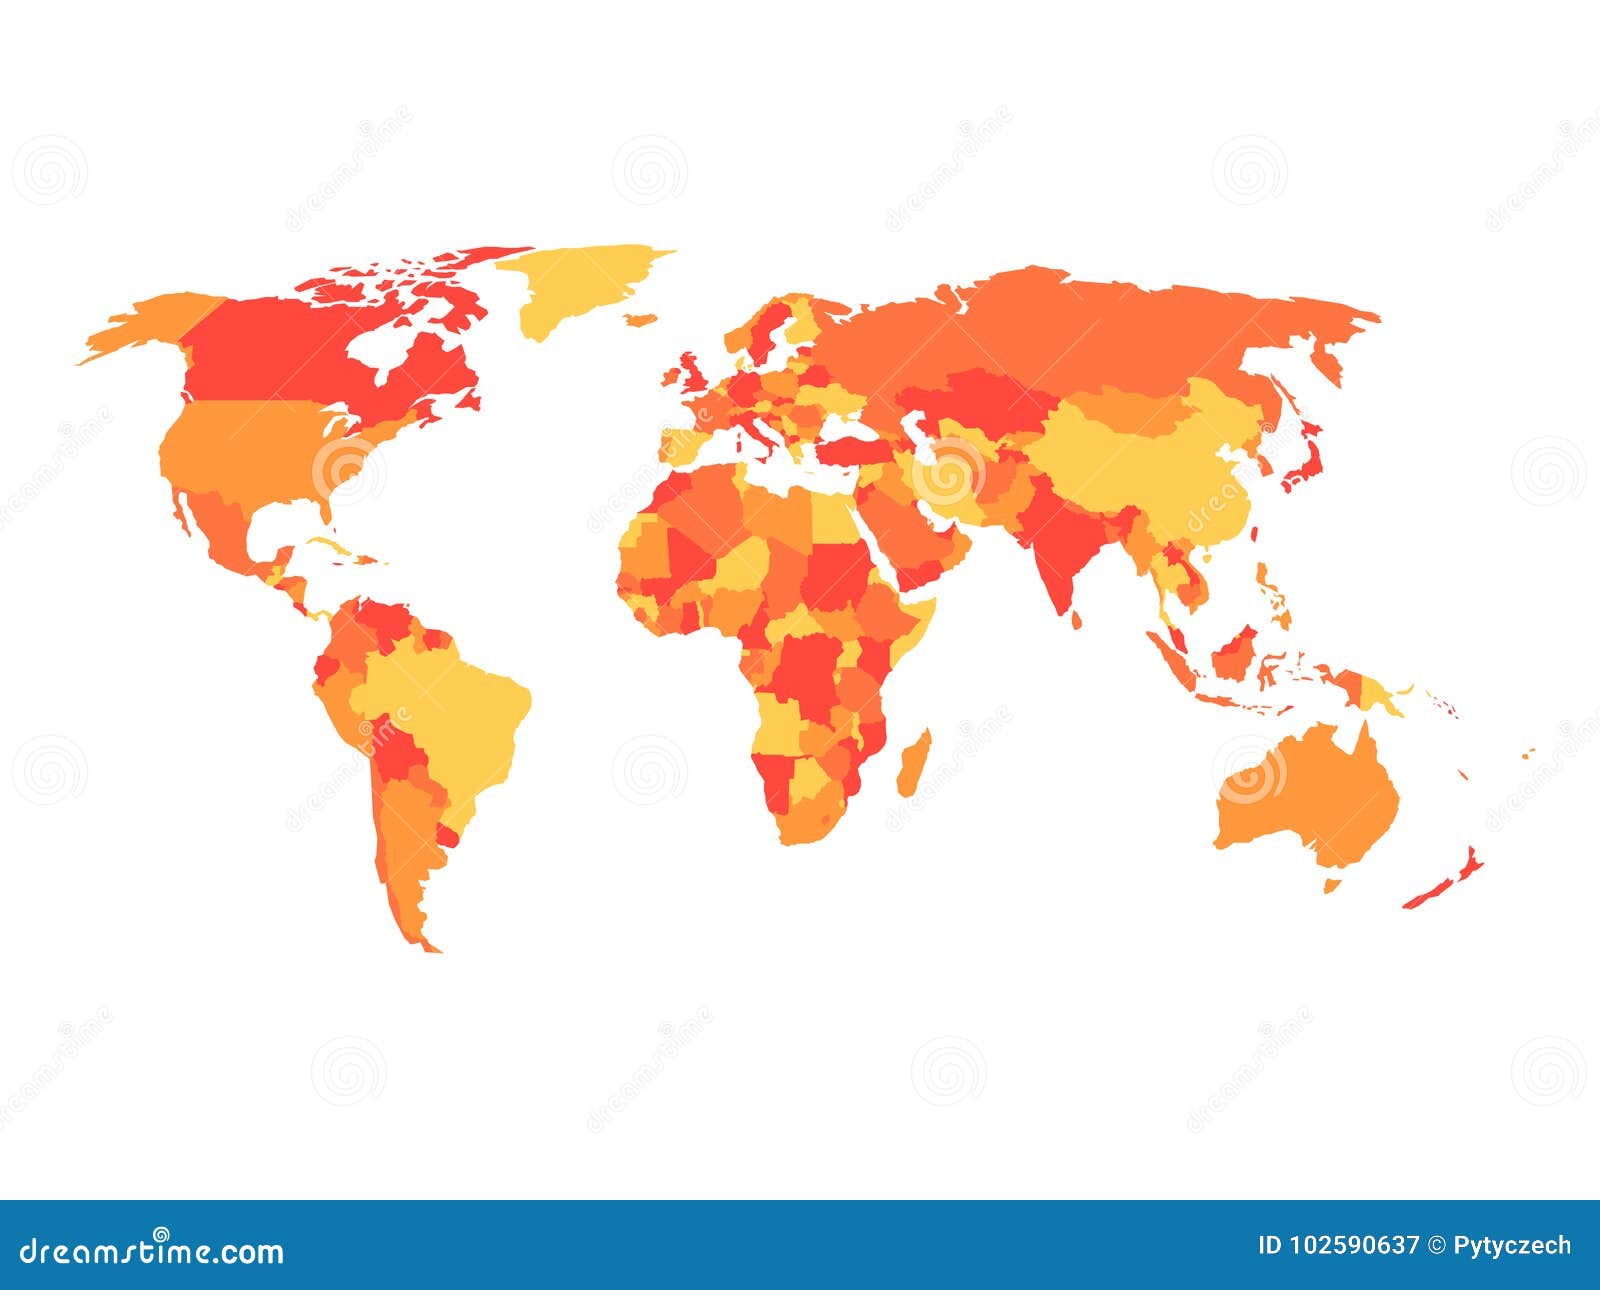 Political Map of World in Four Shades of Orange. Vector Illustration ...